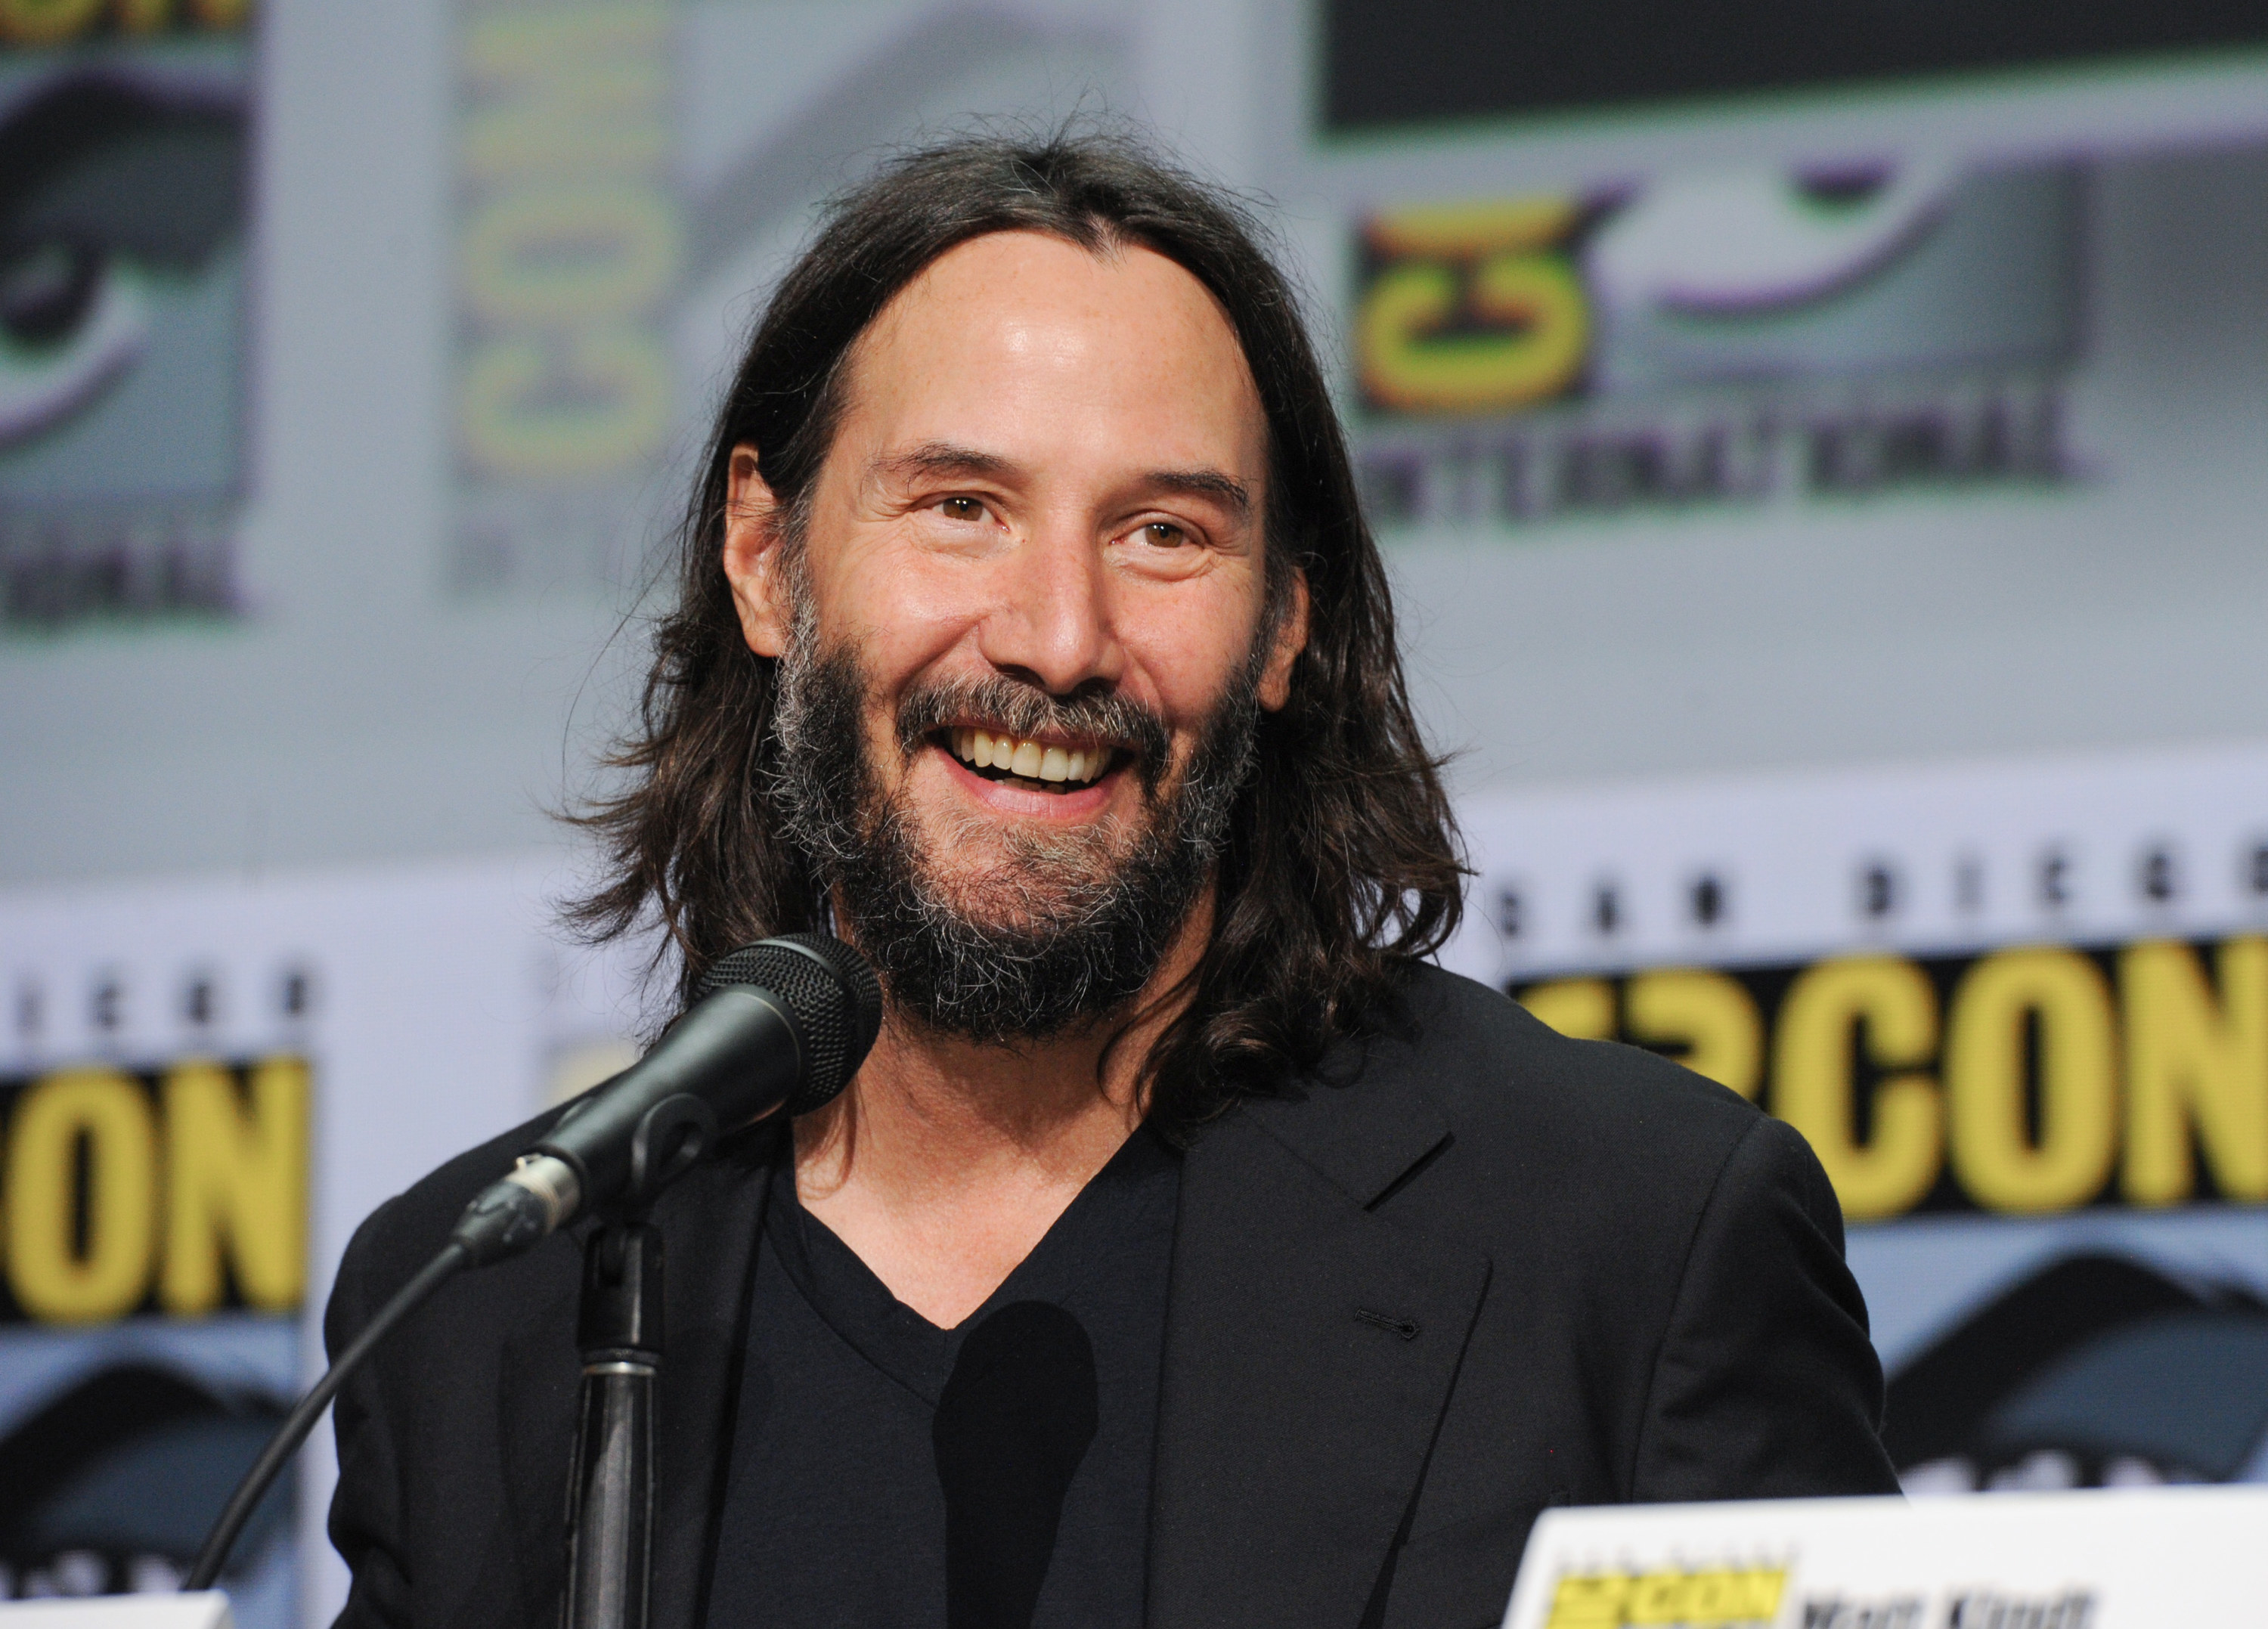 Reeves talking at a panel discussion at Comic-Con